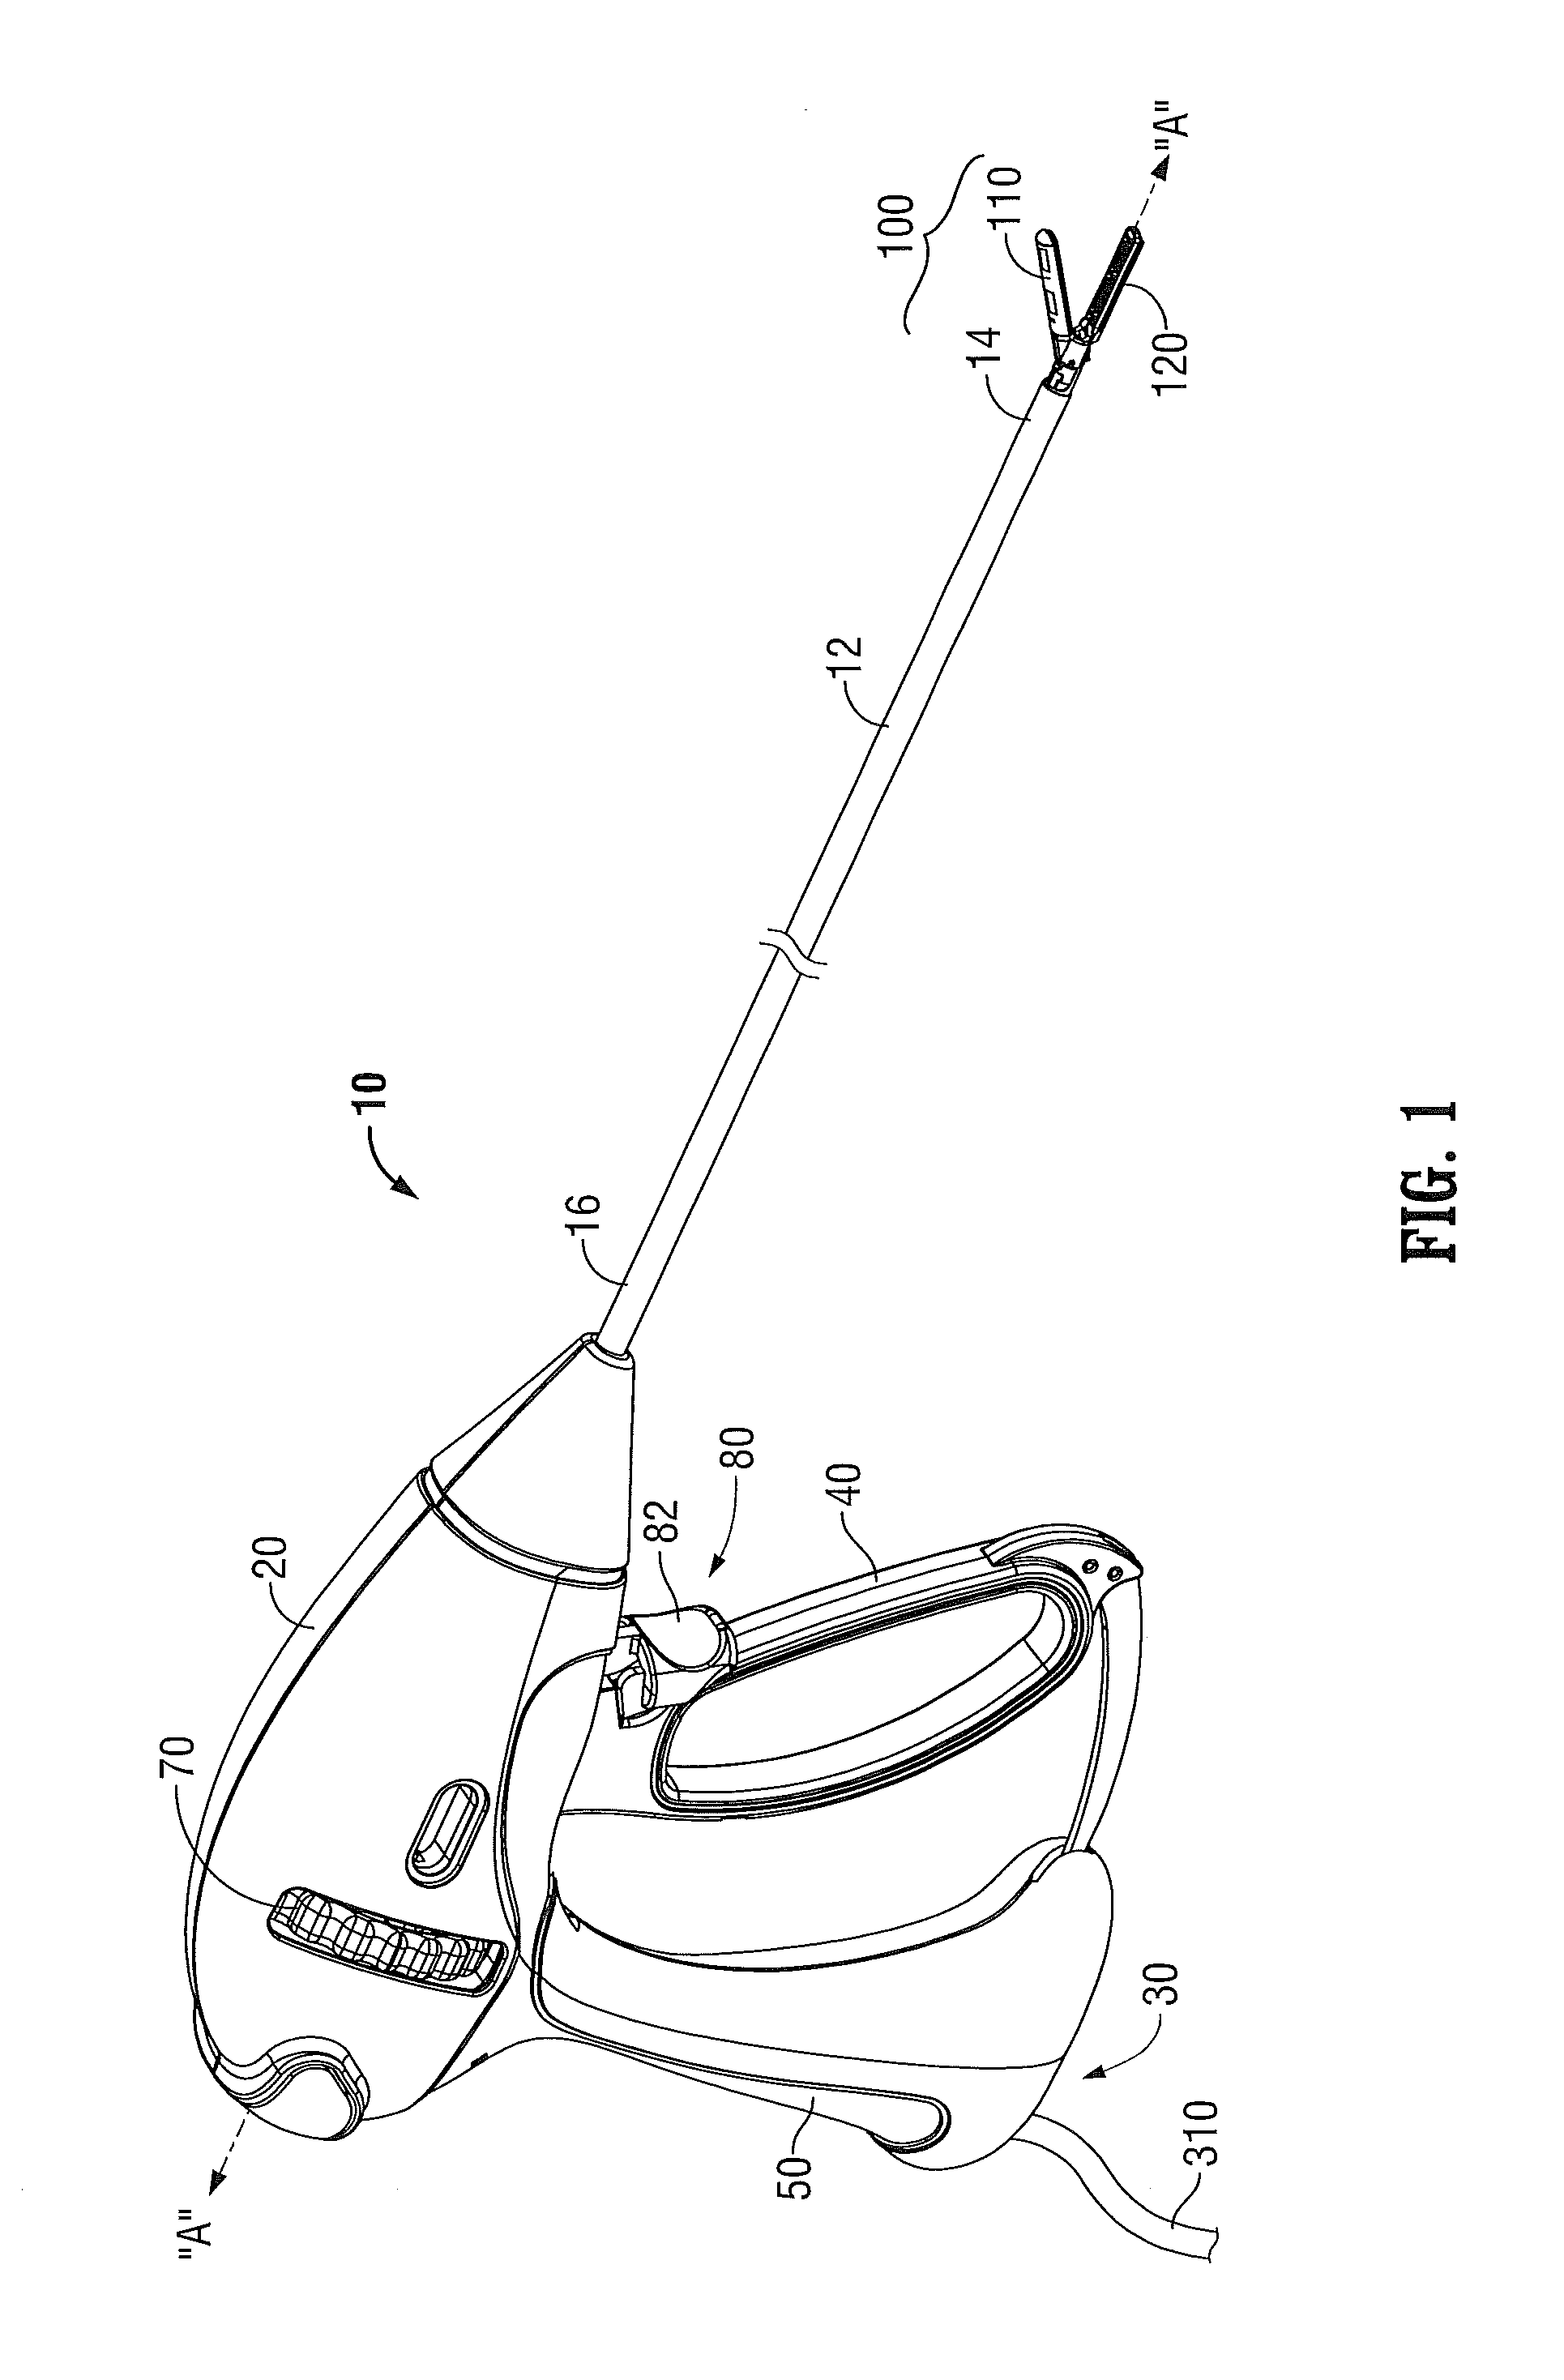 Limited-use medical device